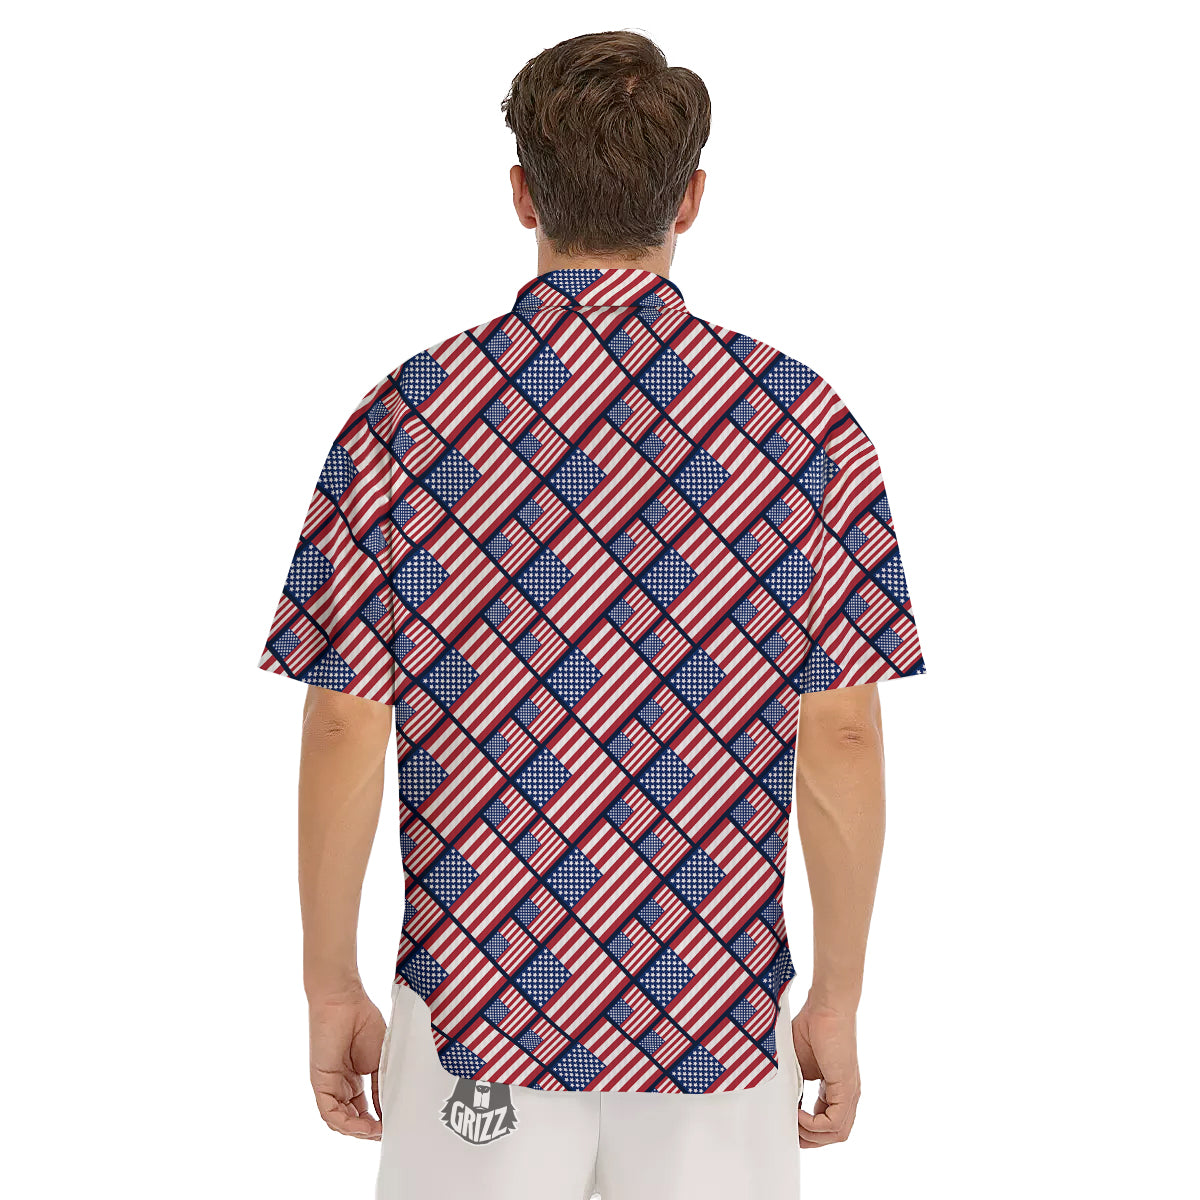 USA Flag Independence Day Print Pattern Men's Short Sleeve Shirts-grizzshop